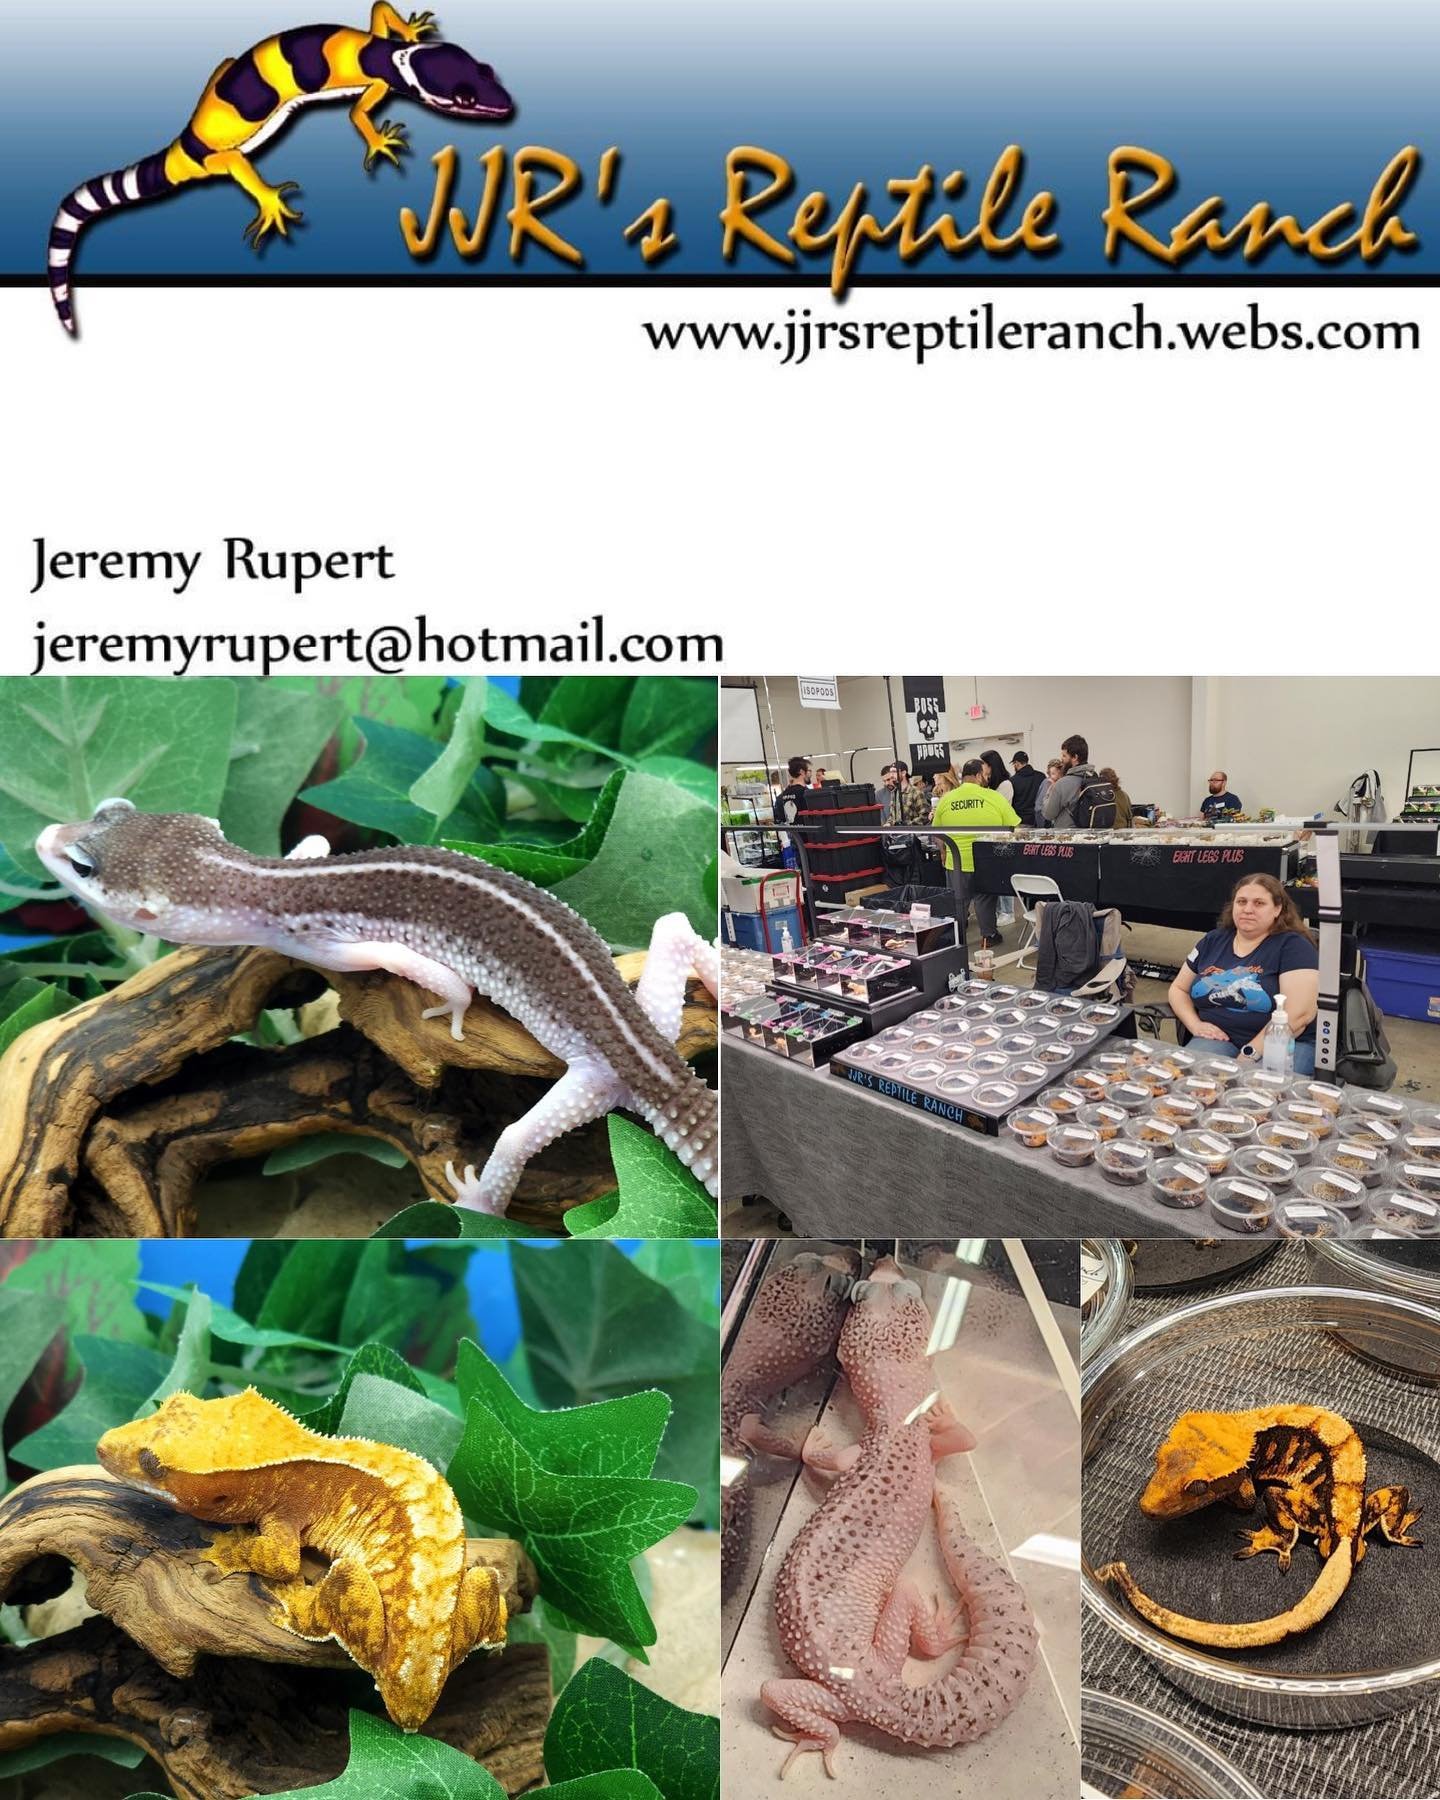 JJR&rsquo;s Reptile Ranch will be joining us on June 2nd! 

They will have a beautiful variety of Leopard Geckos, Crested Geckos, African fat tail geckos and vinyl decals. Make sure to stop by and check them out! #leopardgecko #leopardgeckosofinstagr